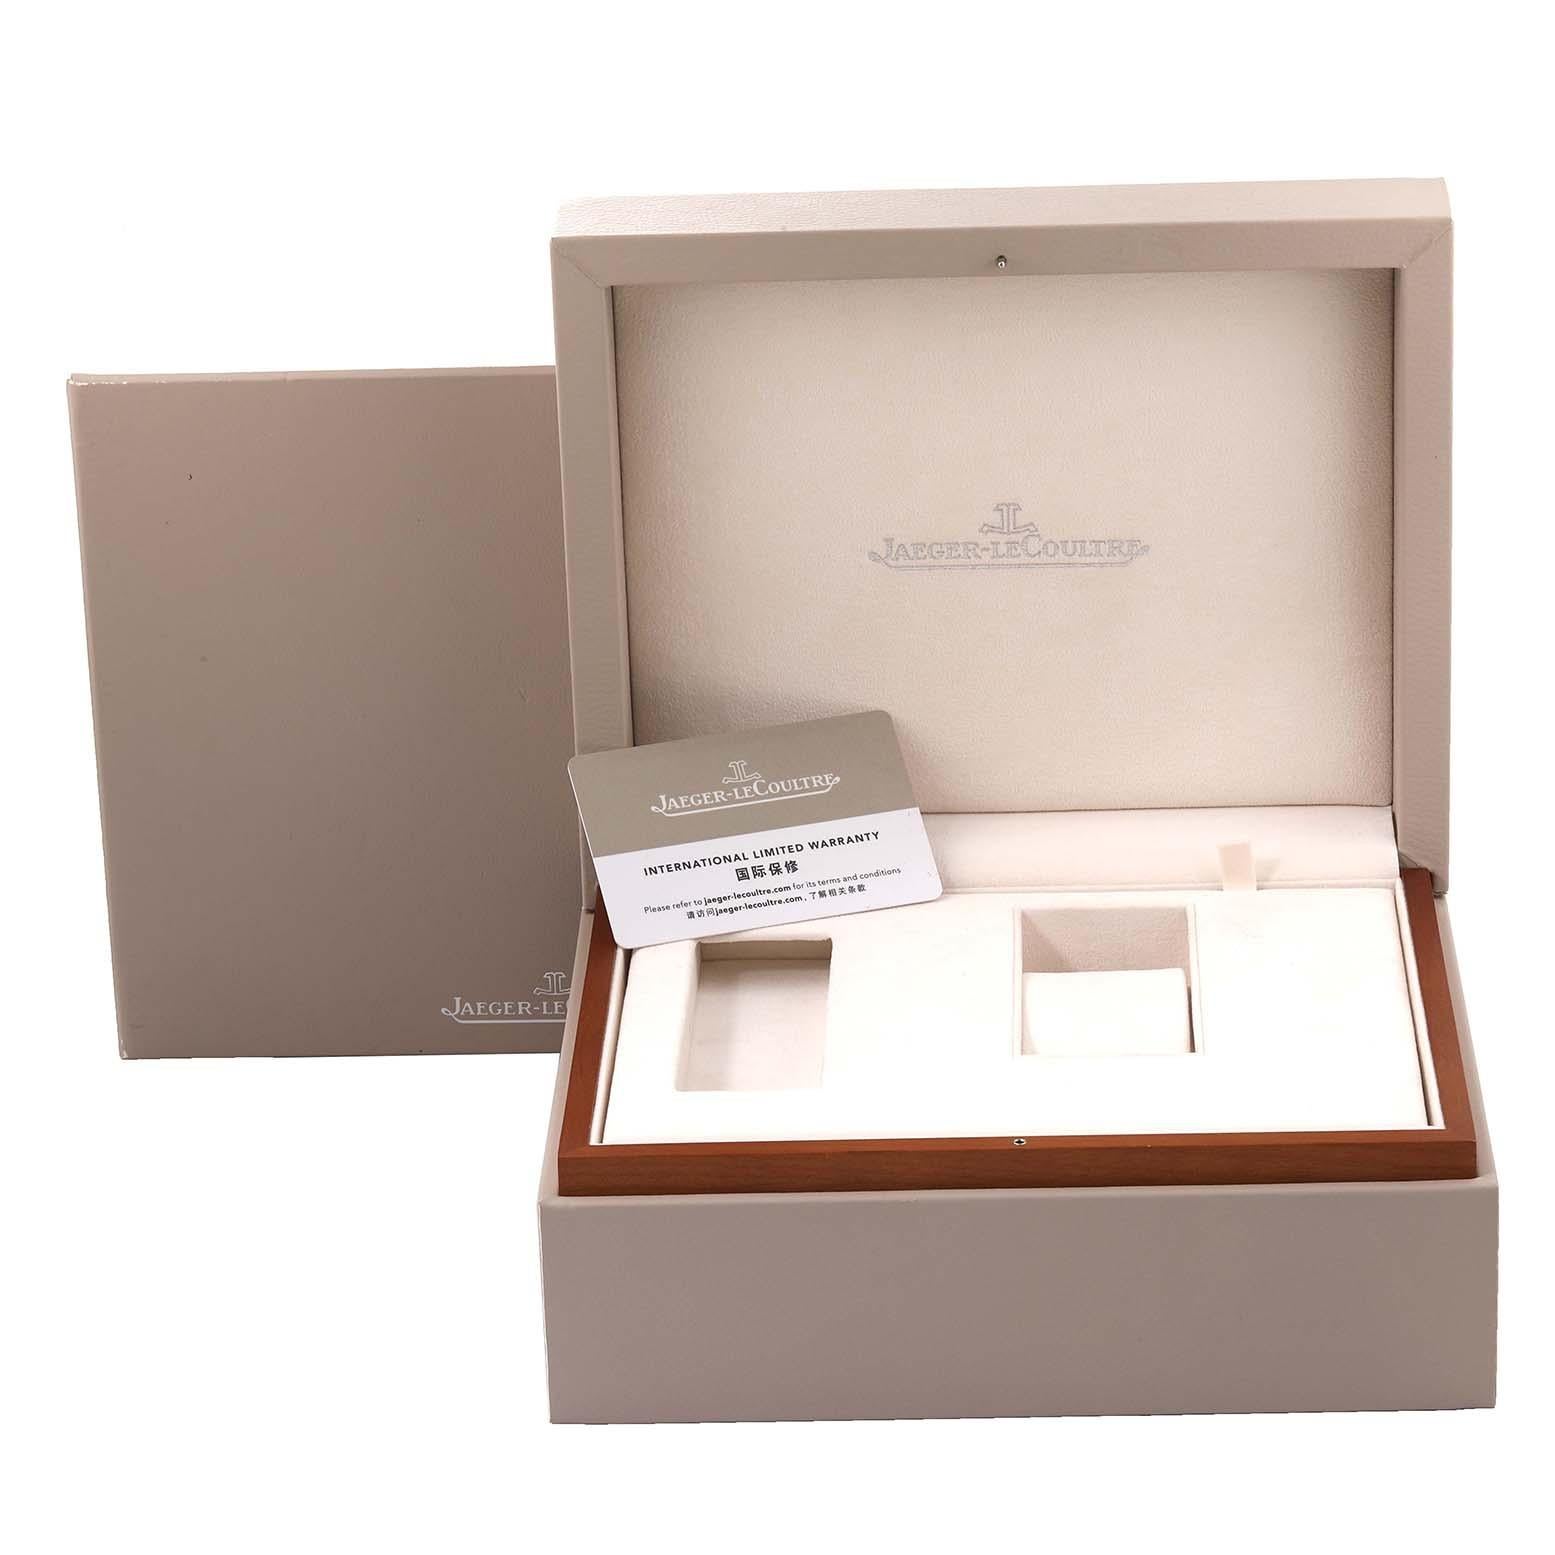 Jaeger LeCoultre Reverso Rose Gold Fagliano Limited Edition Mens  Watch Box Card For Sale 7